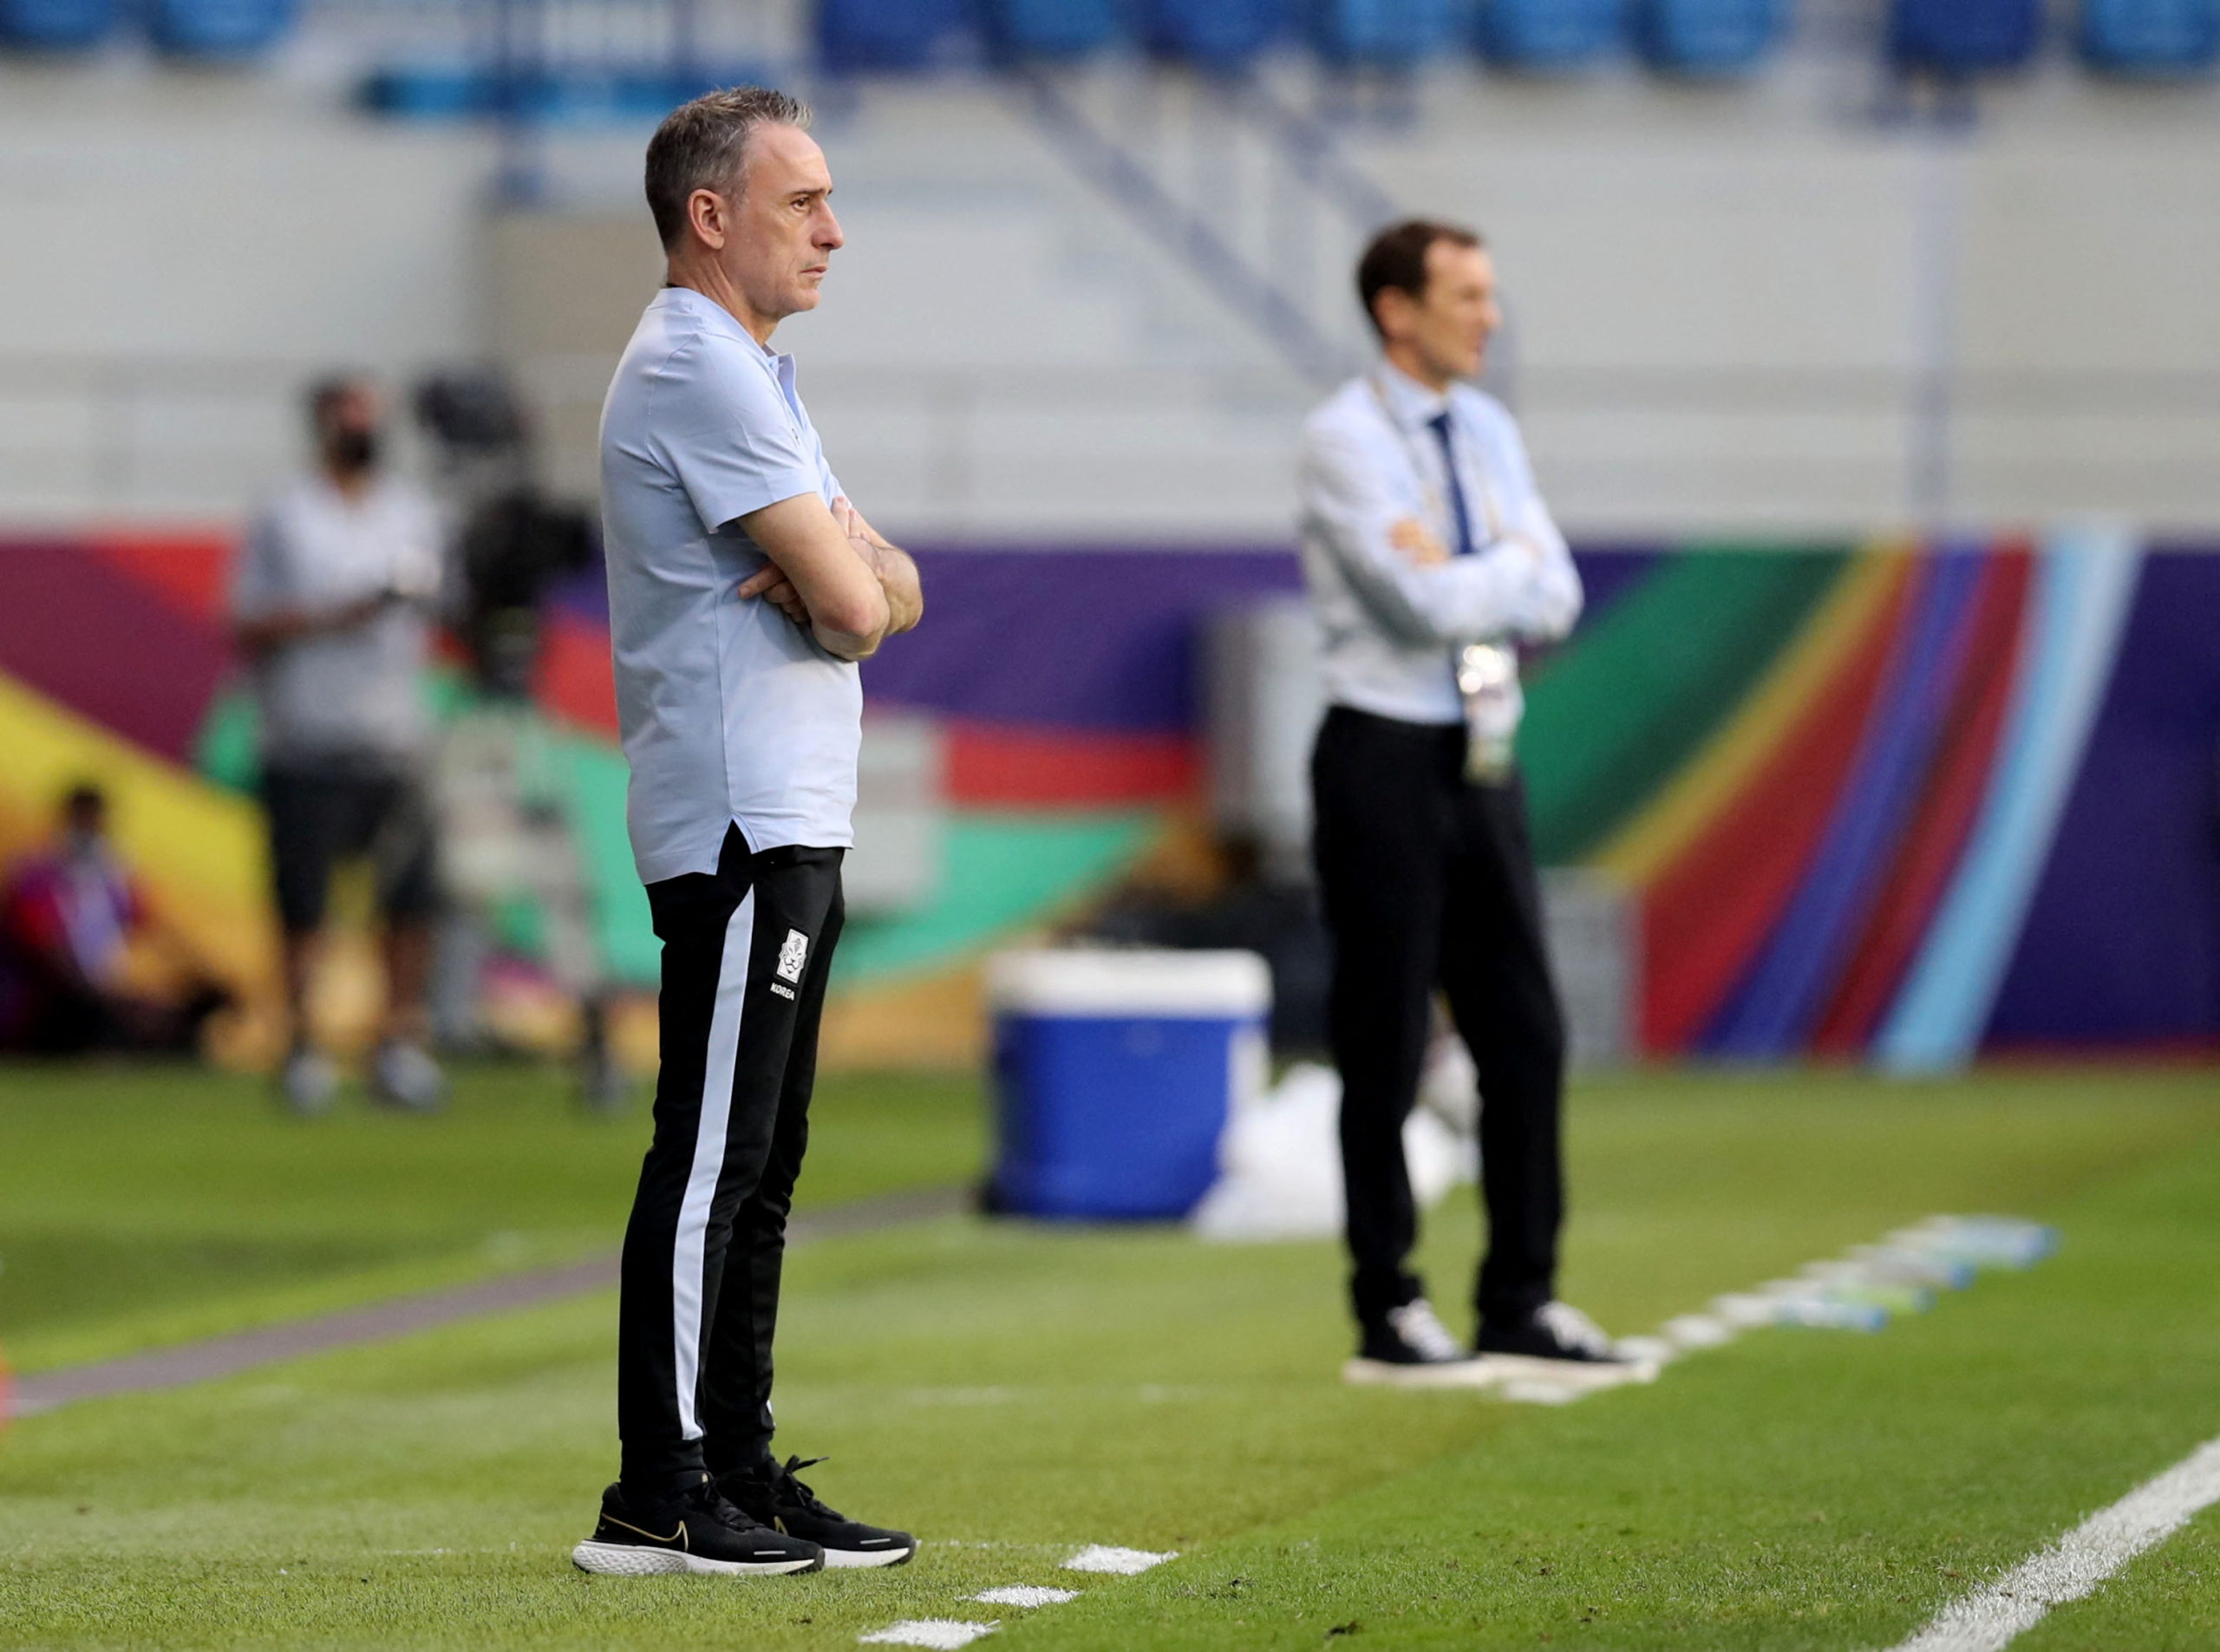 FILE PHOTO: Soccer Football - World Cup - Asian Qualifiers - Group A - United Arab Emirates v South Korea - Al-Maktoum Stadium, Dubai, United Arab Emirates - March 29, 2022  South Korea coach Paulo Bento  